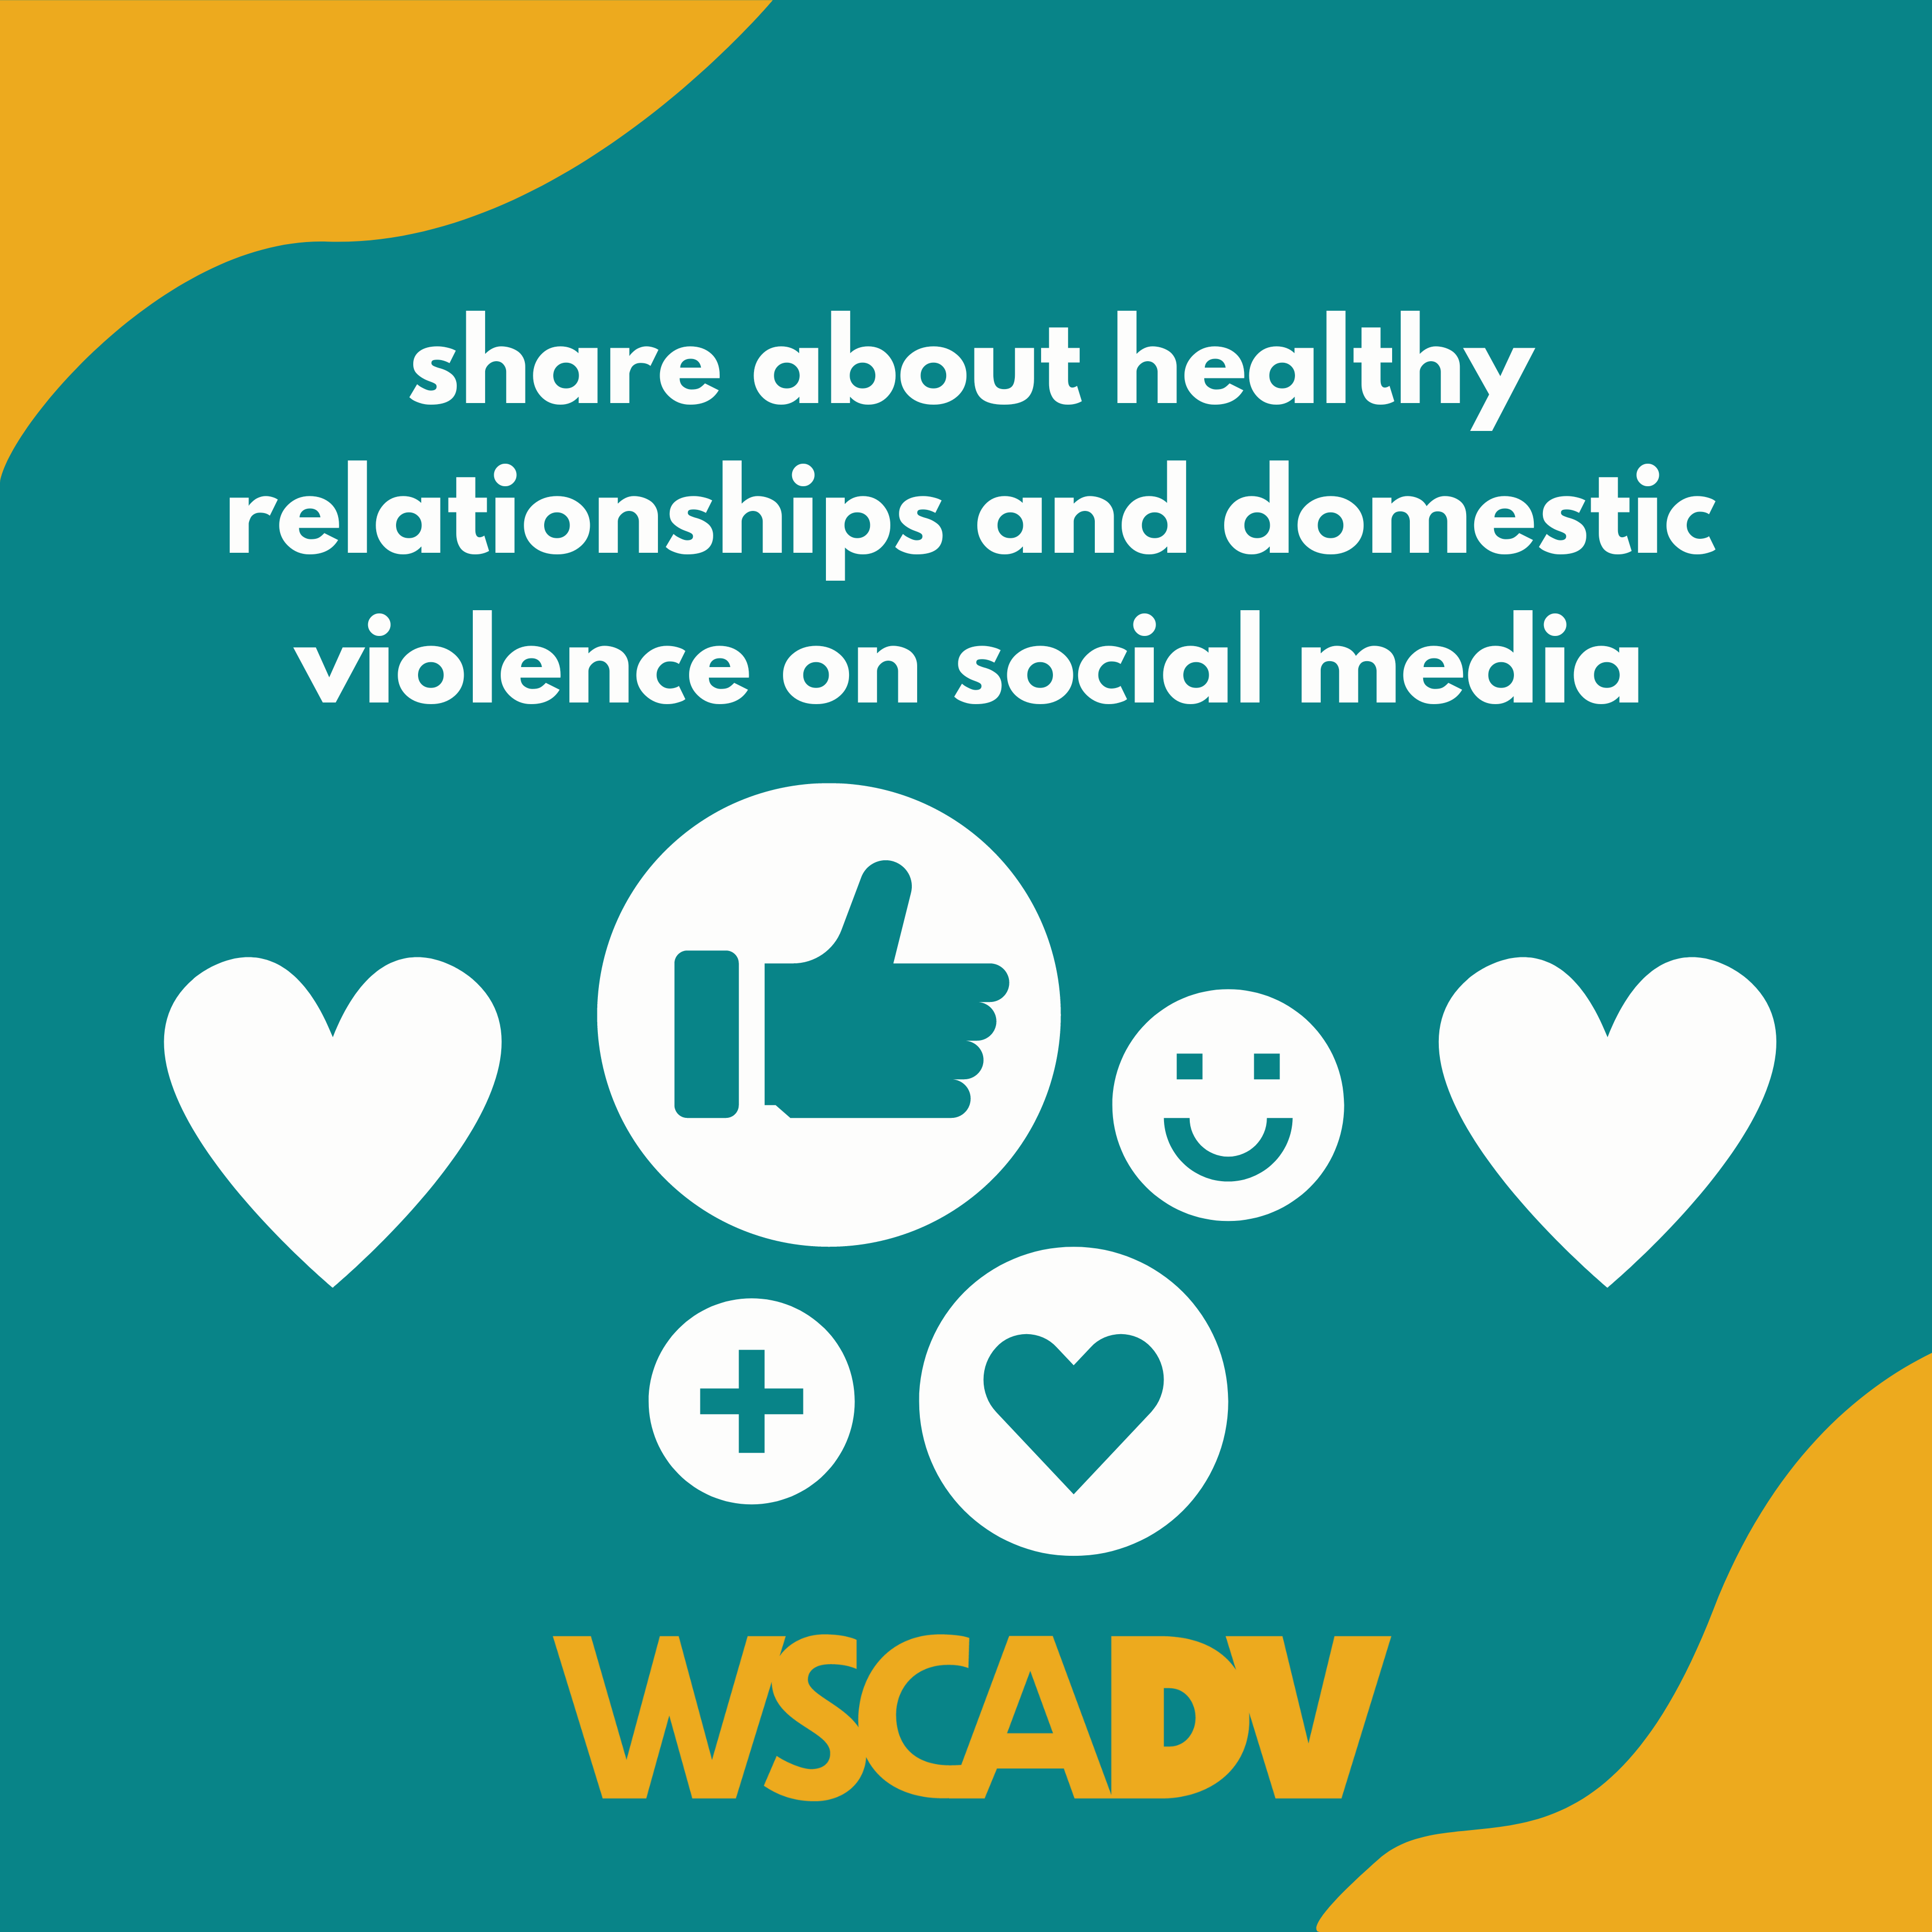 share about healthy relationships and domestic violence on social media